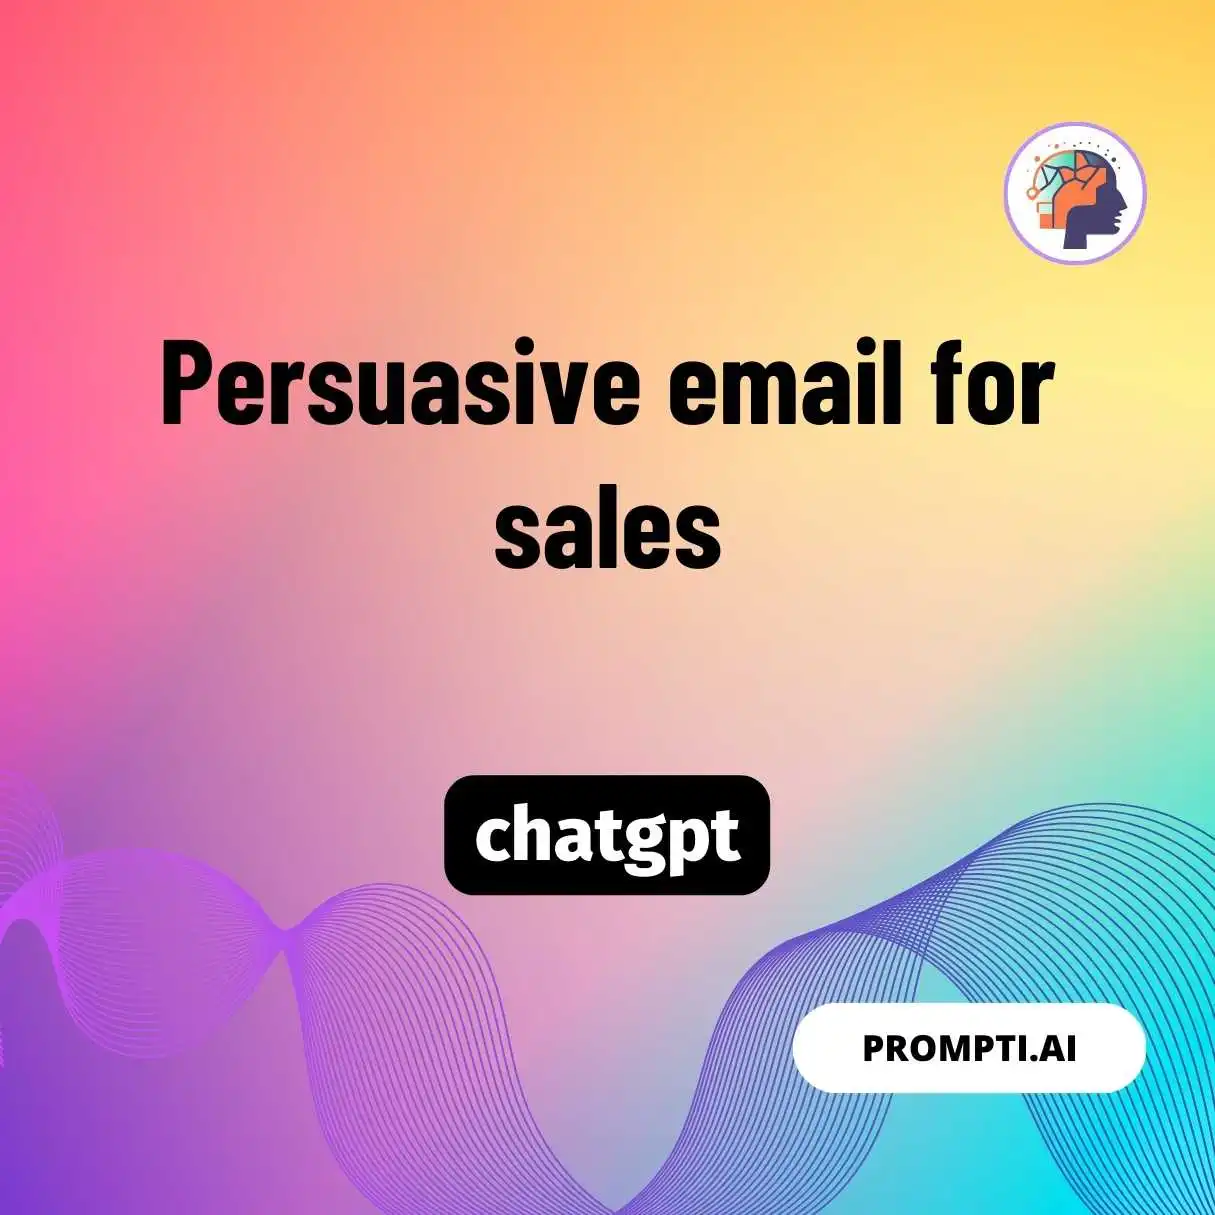 Persuasive email for sales